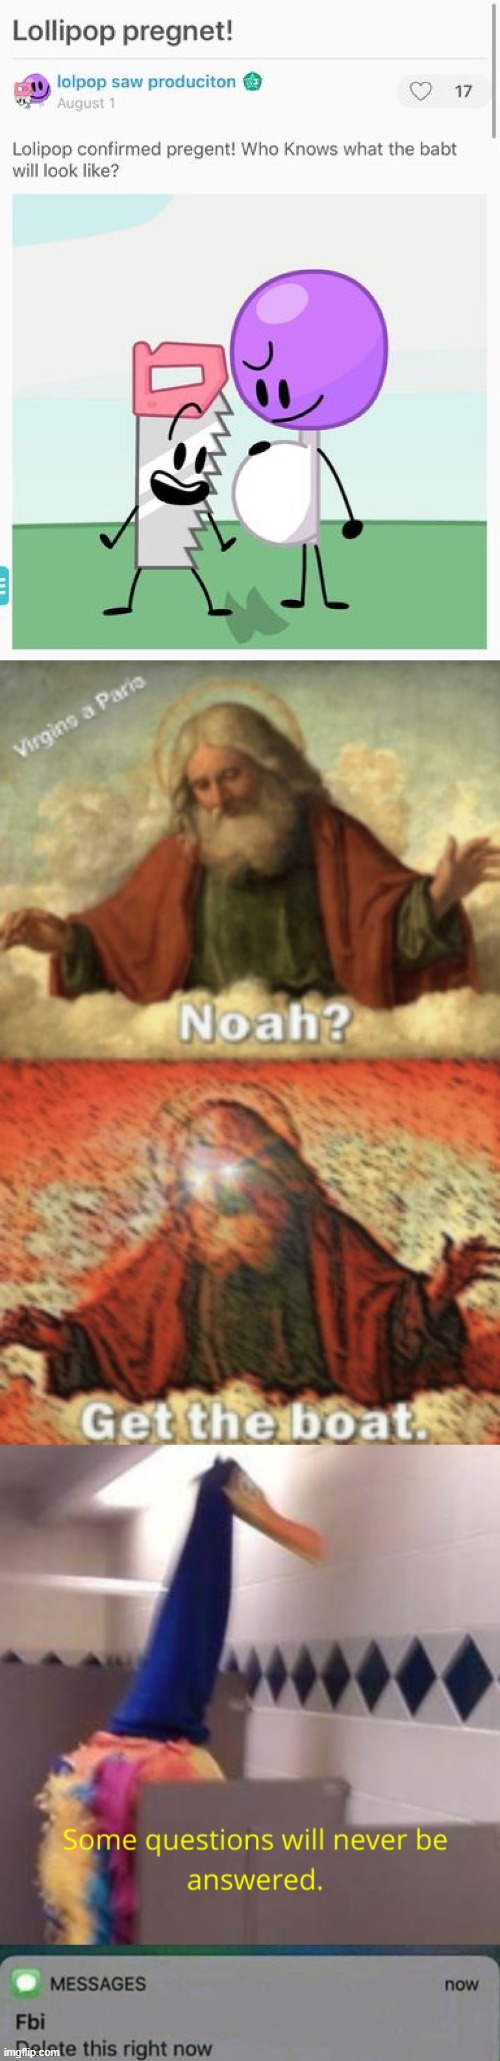 help me now | image tagged in noah get the boat,some questions will never be answered,bfb,pregnant,saw,lollipop | made w/ Imgflip meme maker